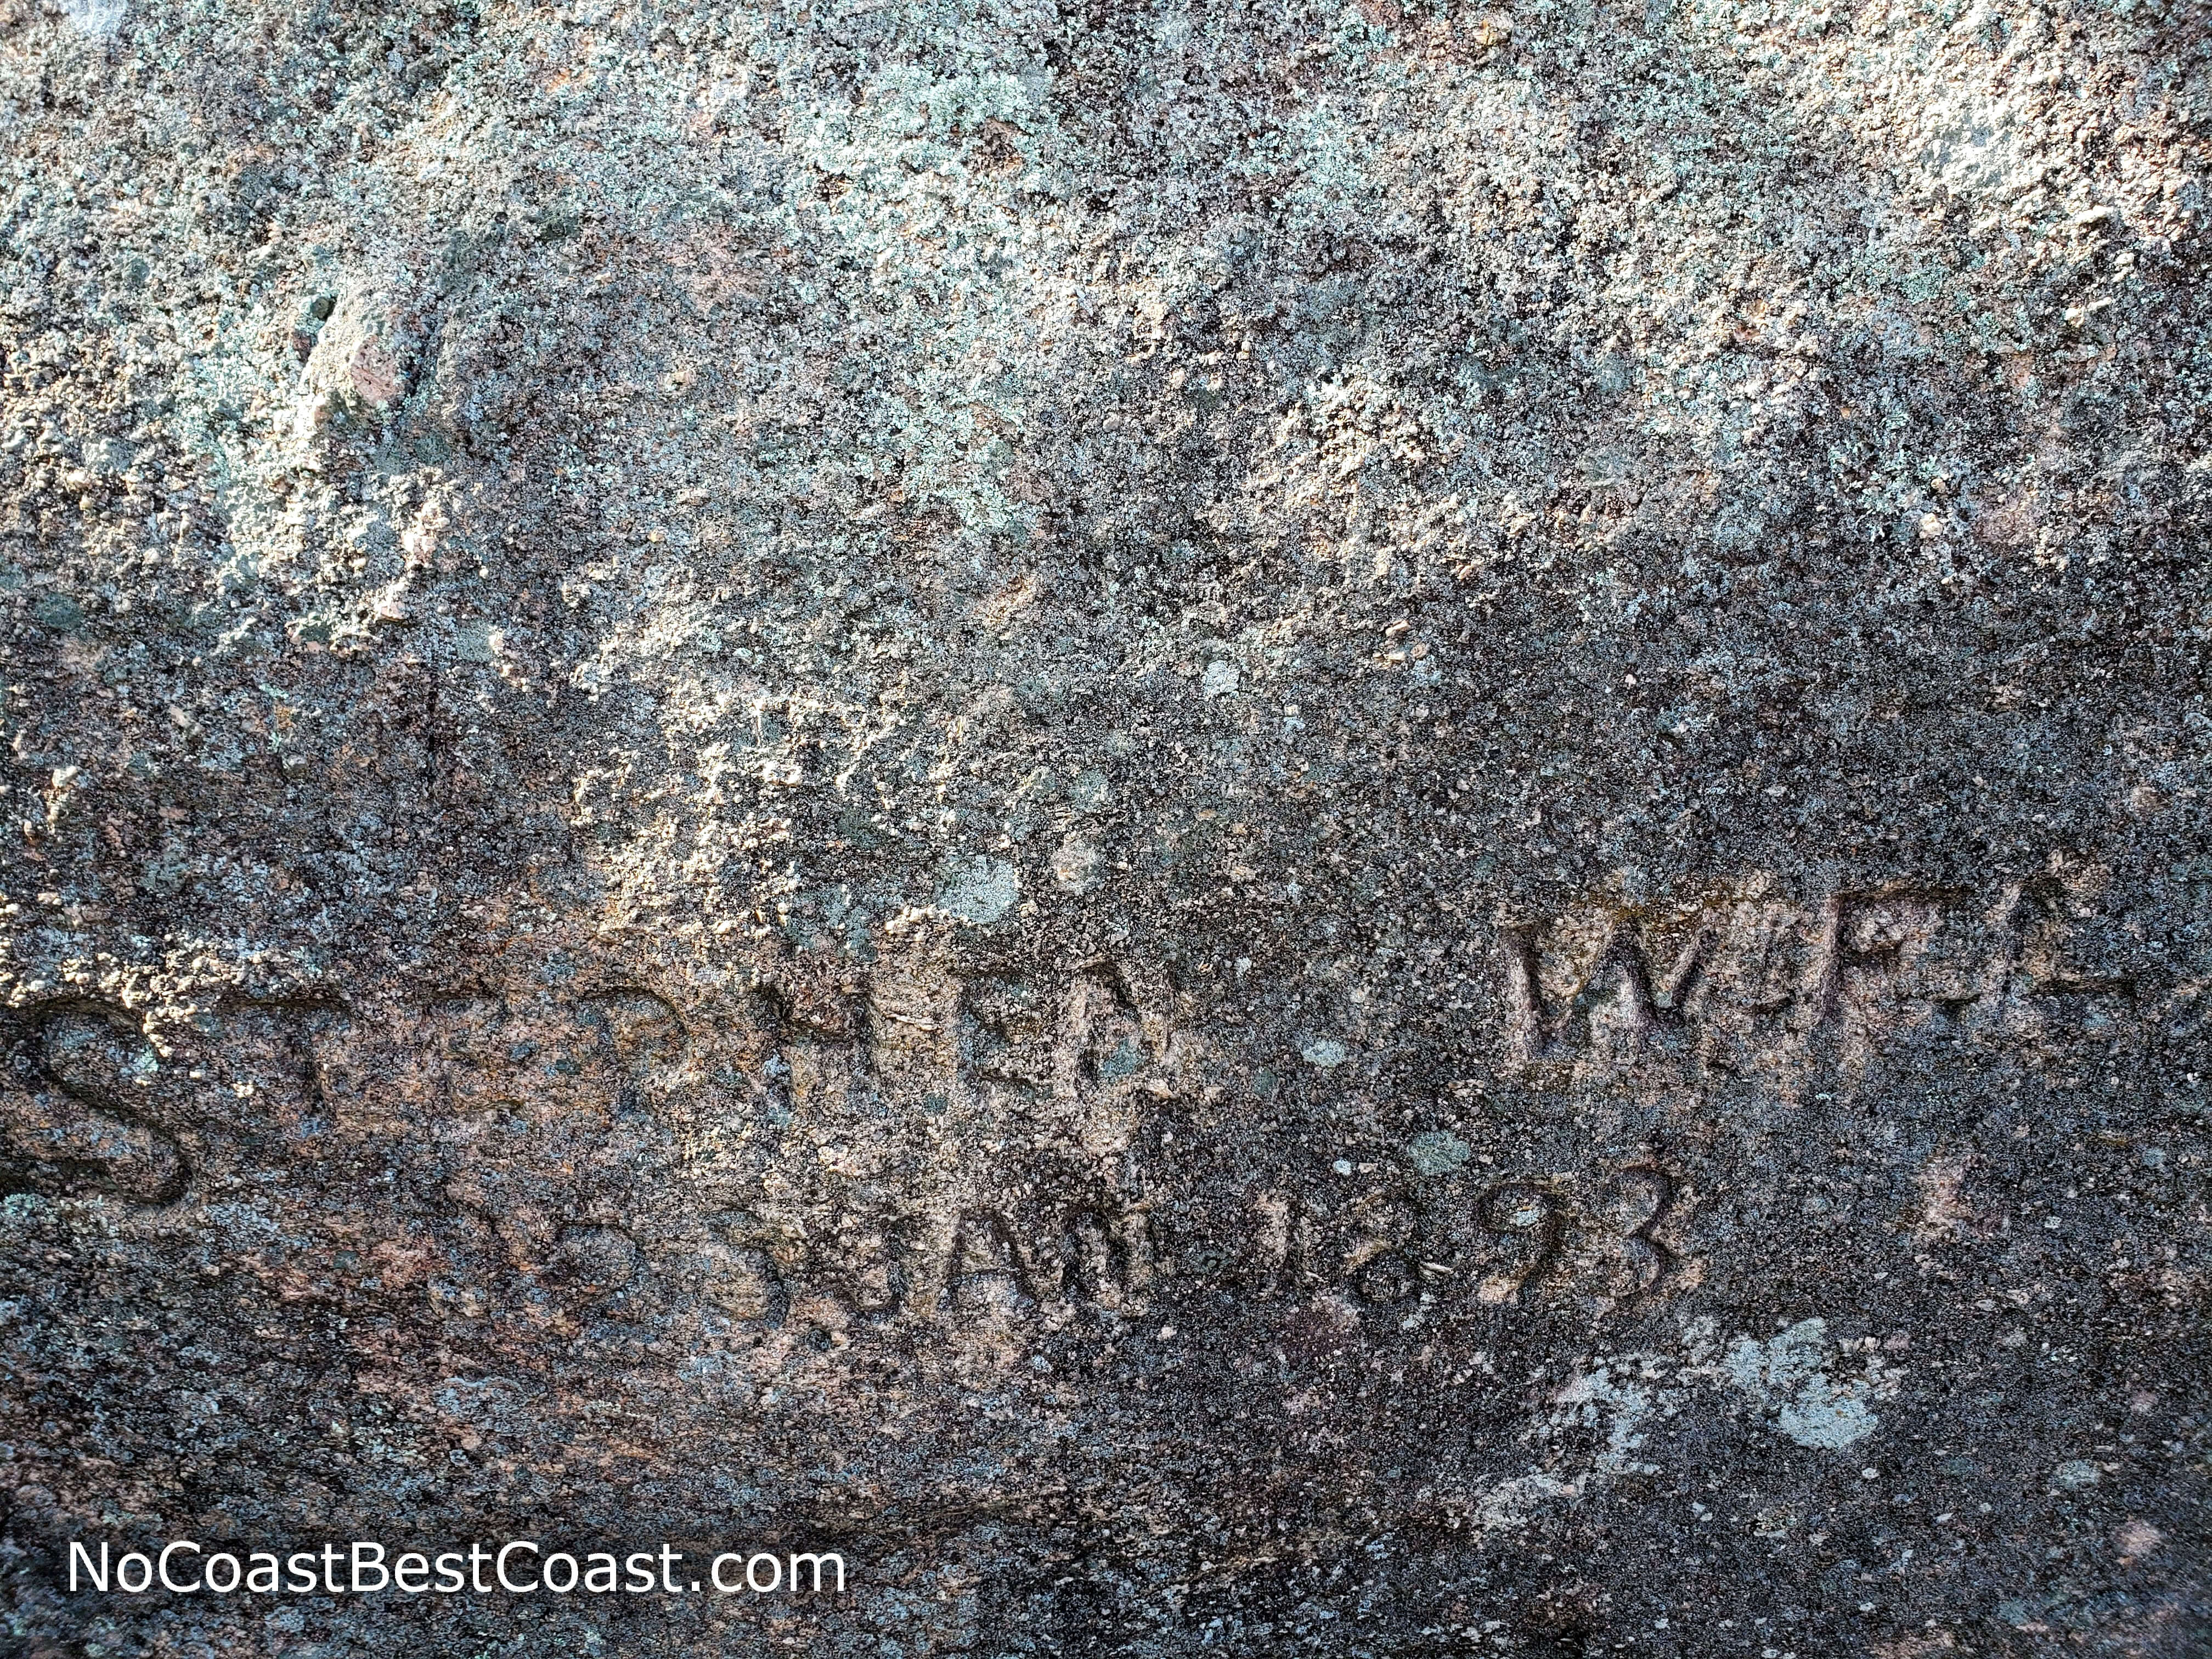 Historic graffiti from 1893 carved by a quarry worker